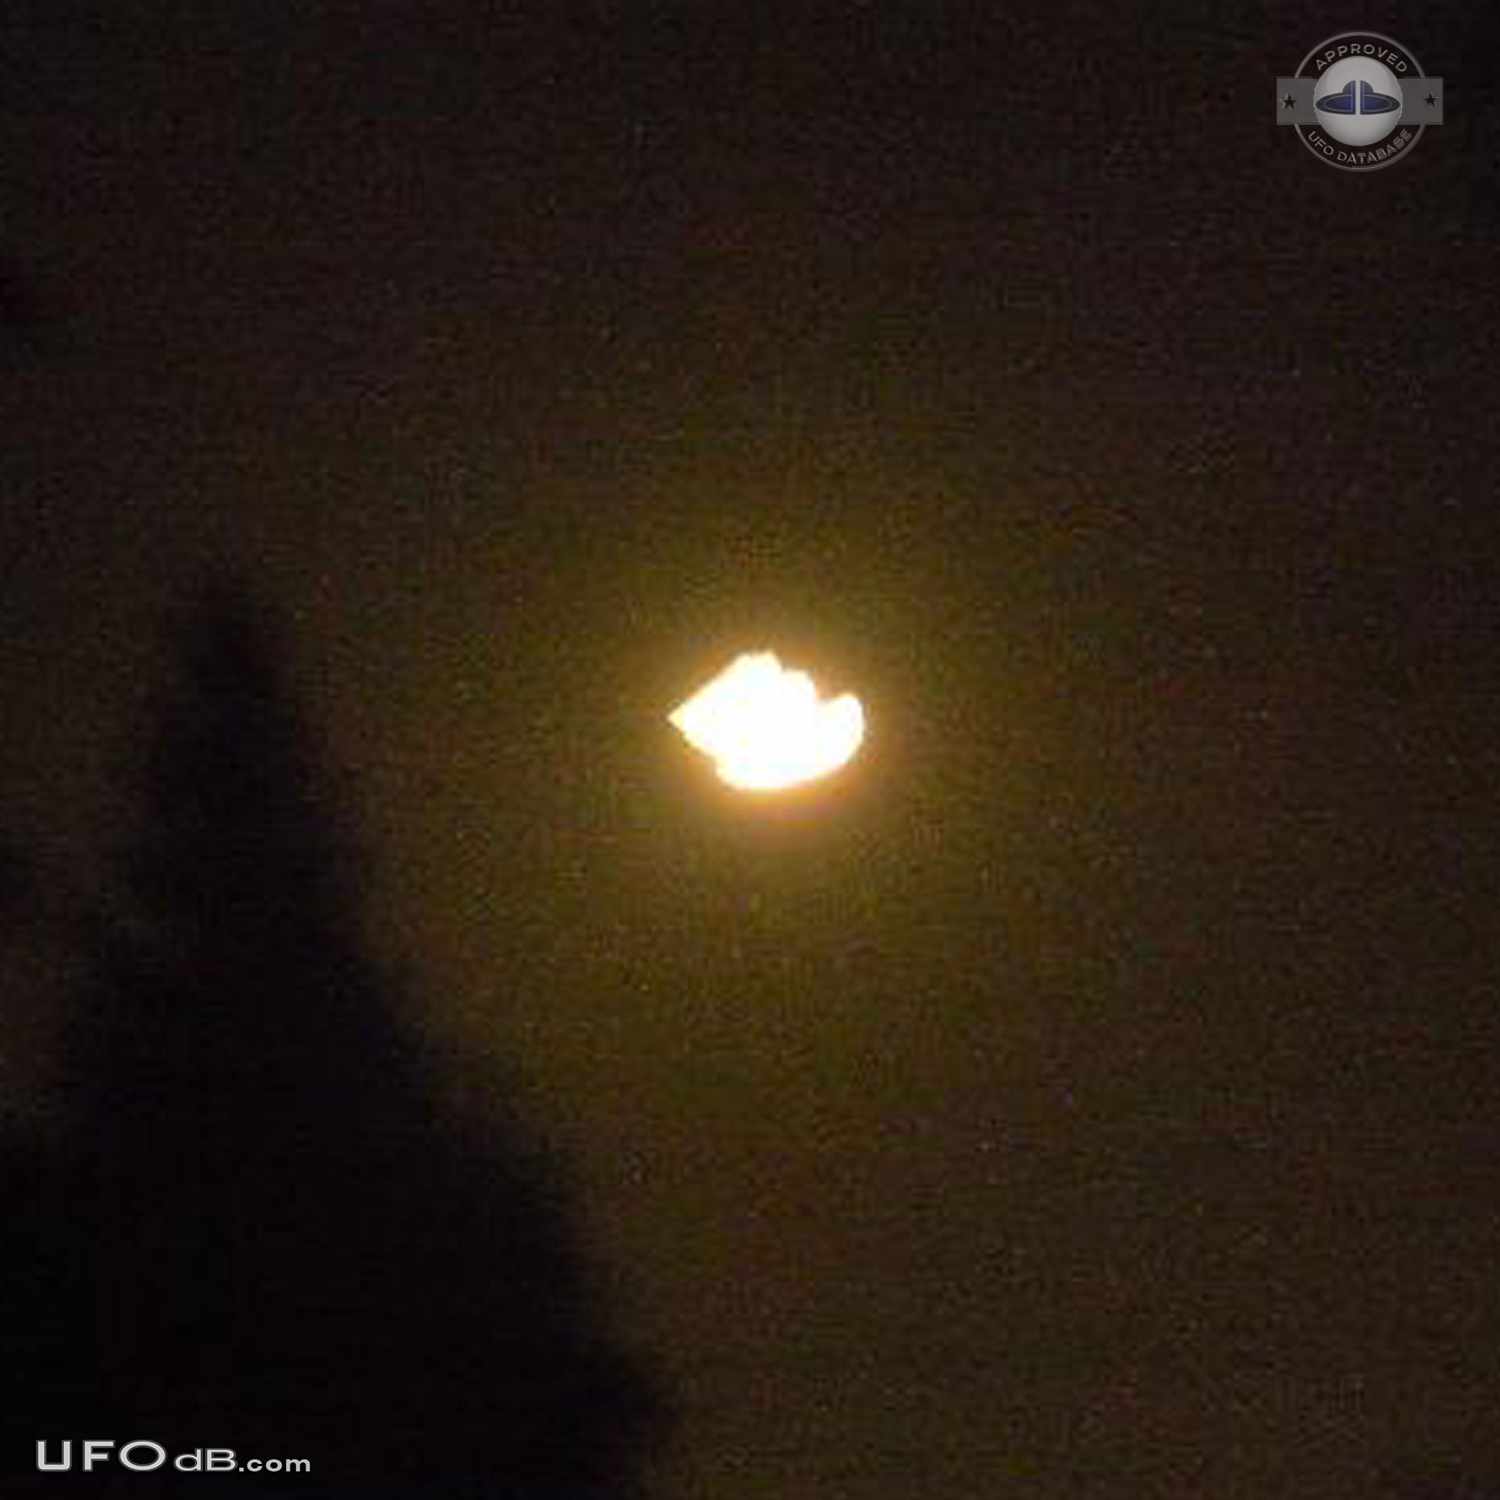 Strange Moon UFO with multicolor reflections in Indiana USA 2012 UFO Picture #510-1